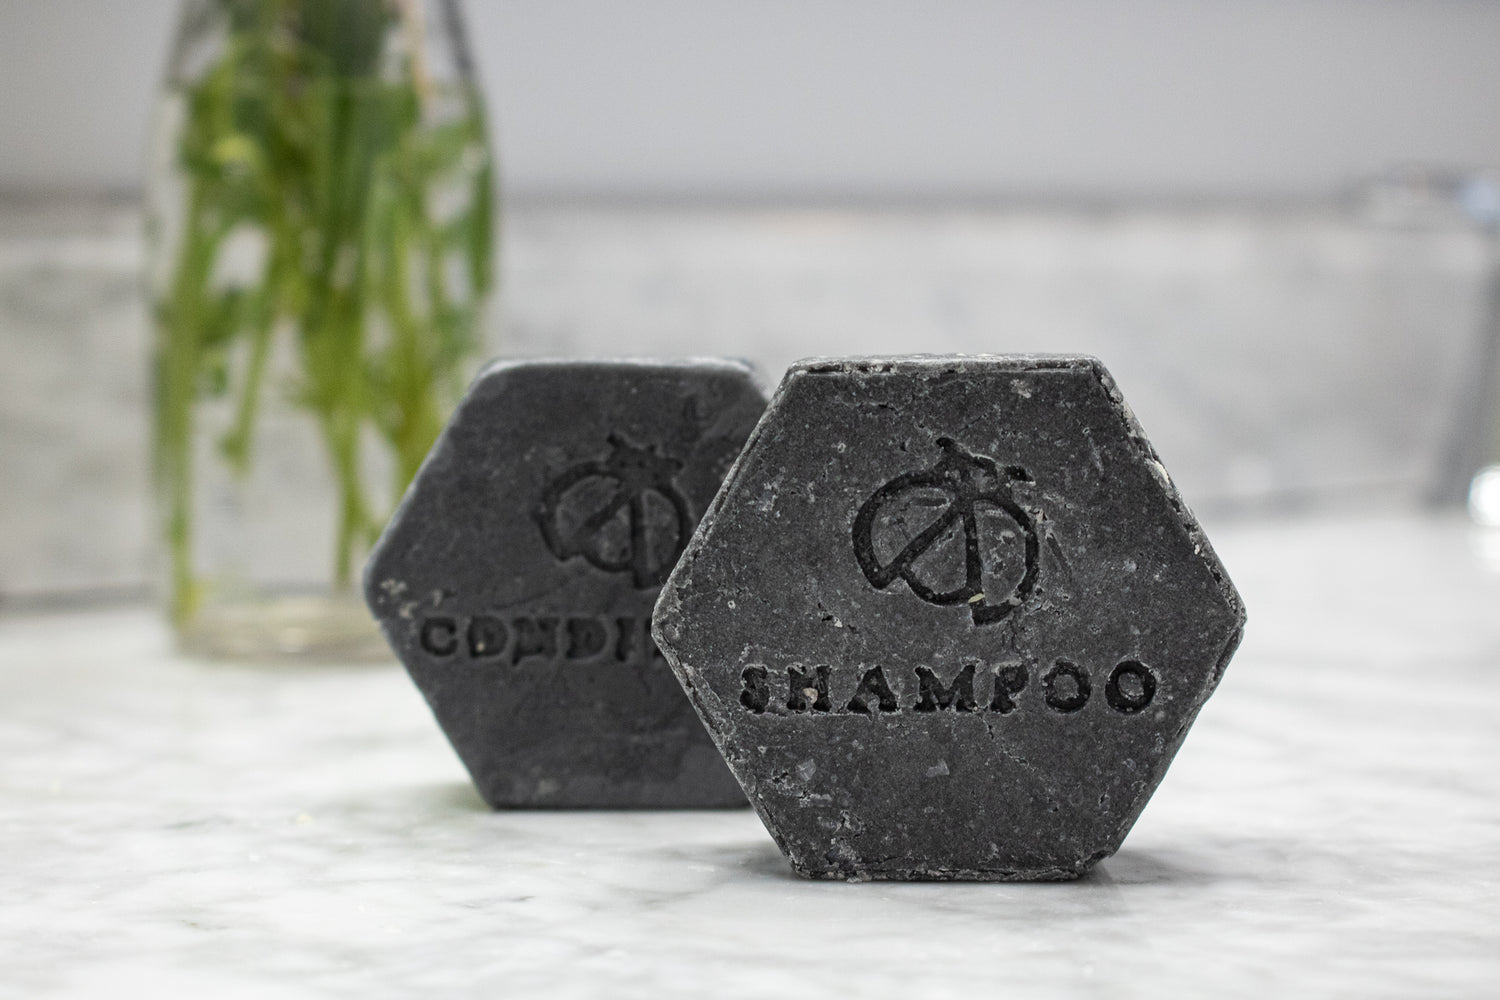 Bubbles & Balms Tea Tree & Charcoal Shampoo & Conditioner Zero-Waste Hair Care Bars With Activated Charcoal